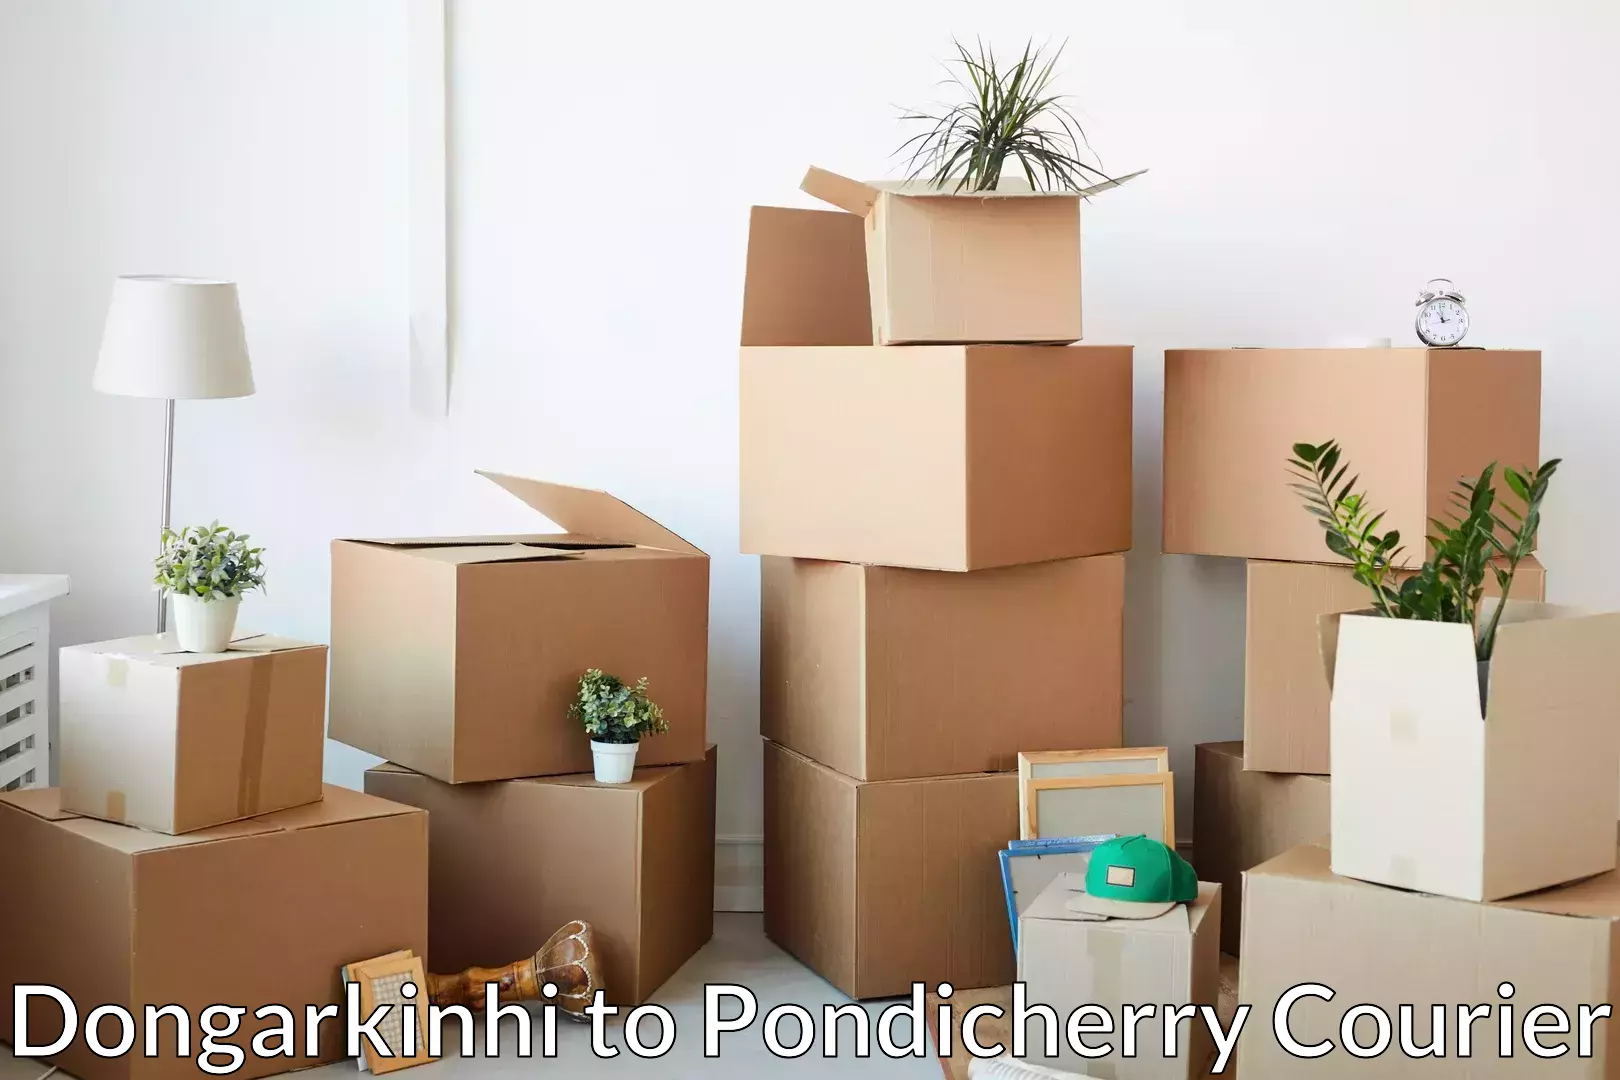 Full home relocation services Dongarkinhi to Pondicherry